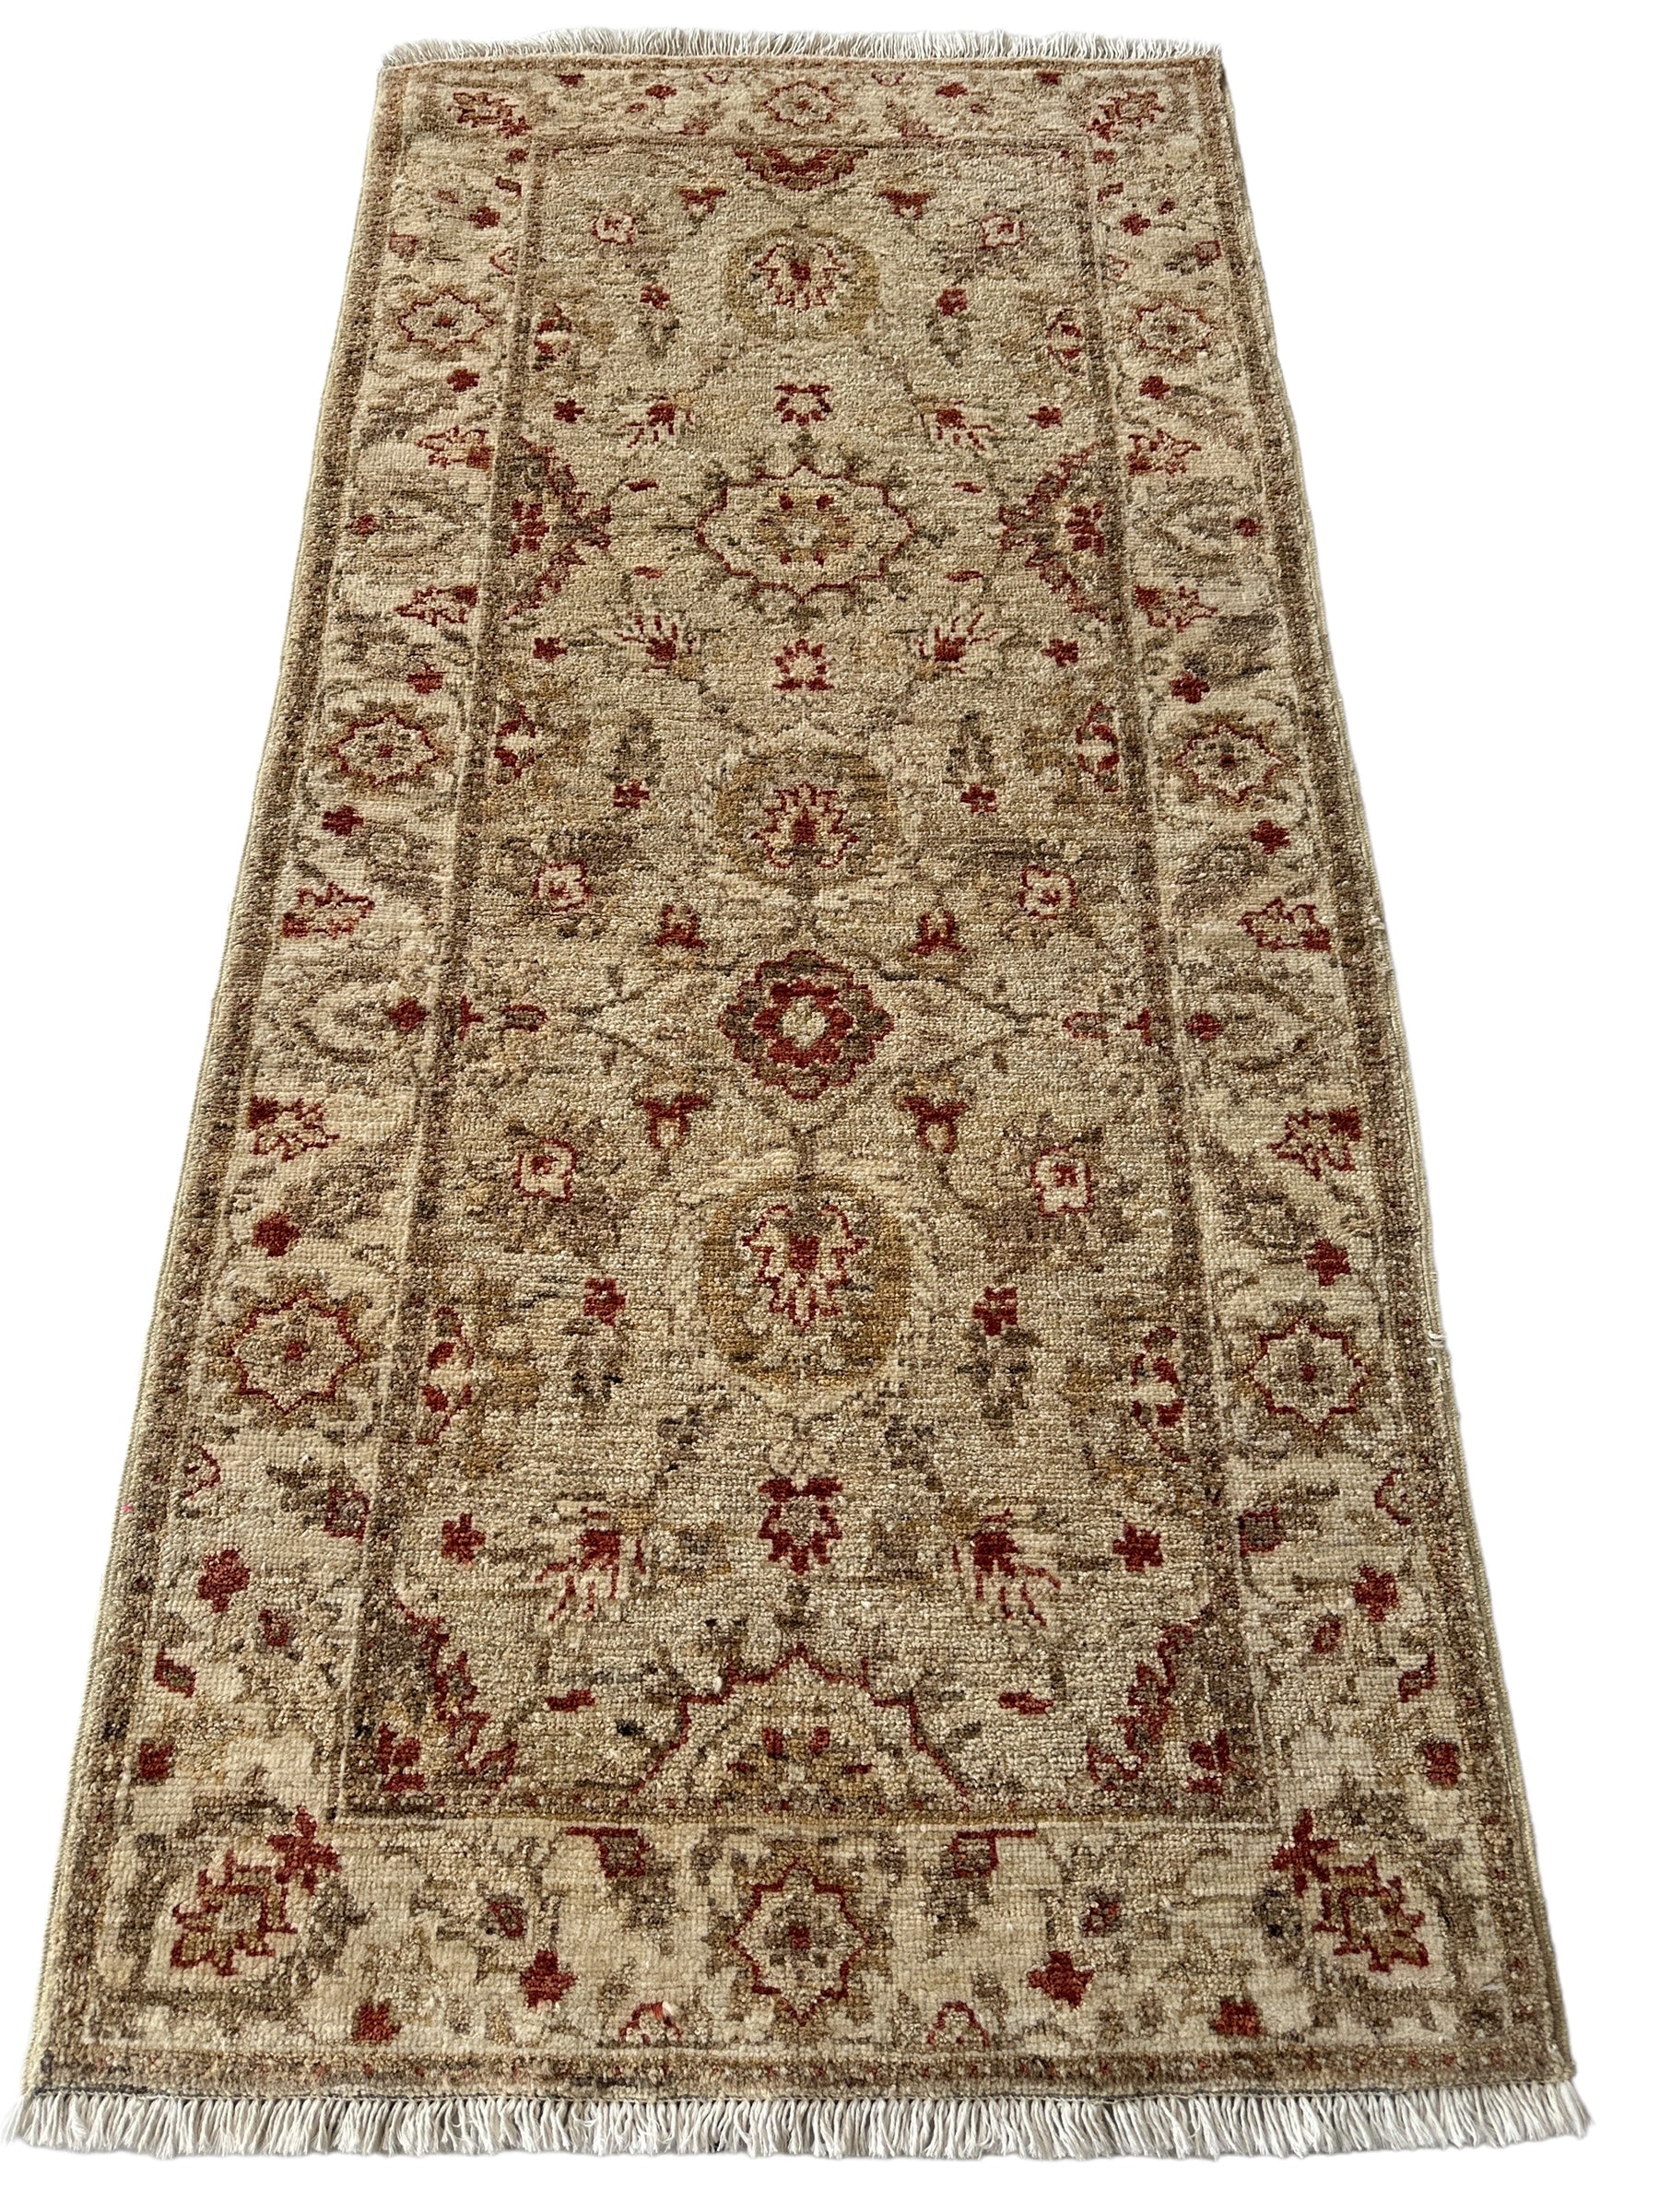 Hand-knotted Wool Small Runner Rug 2’6” x 5’4”